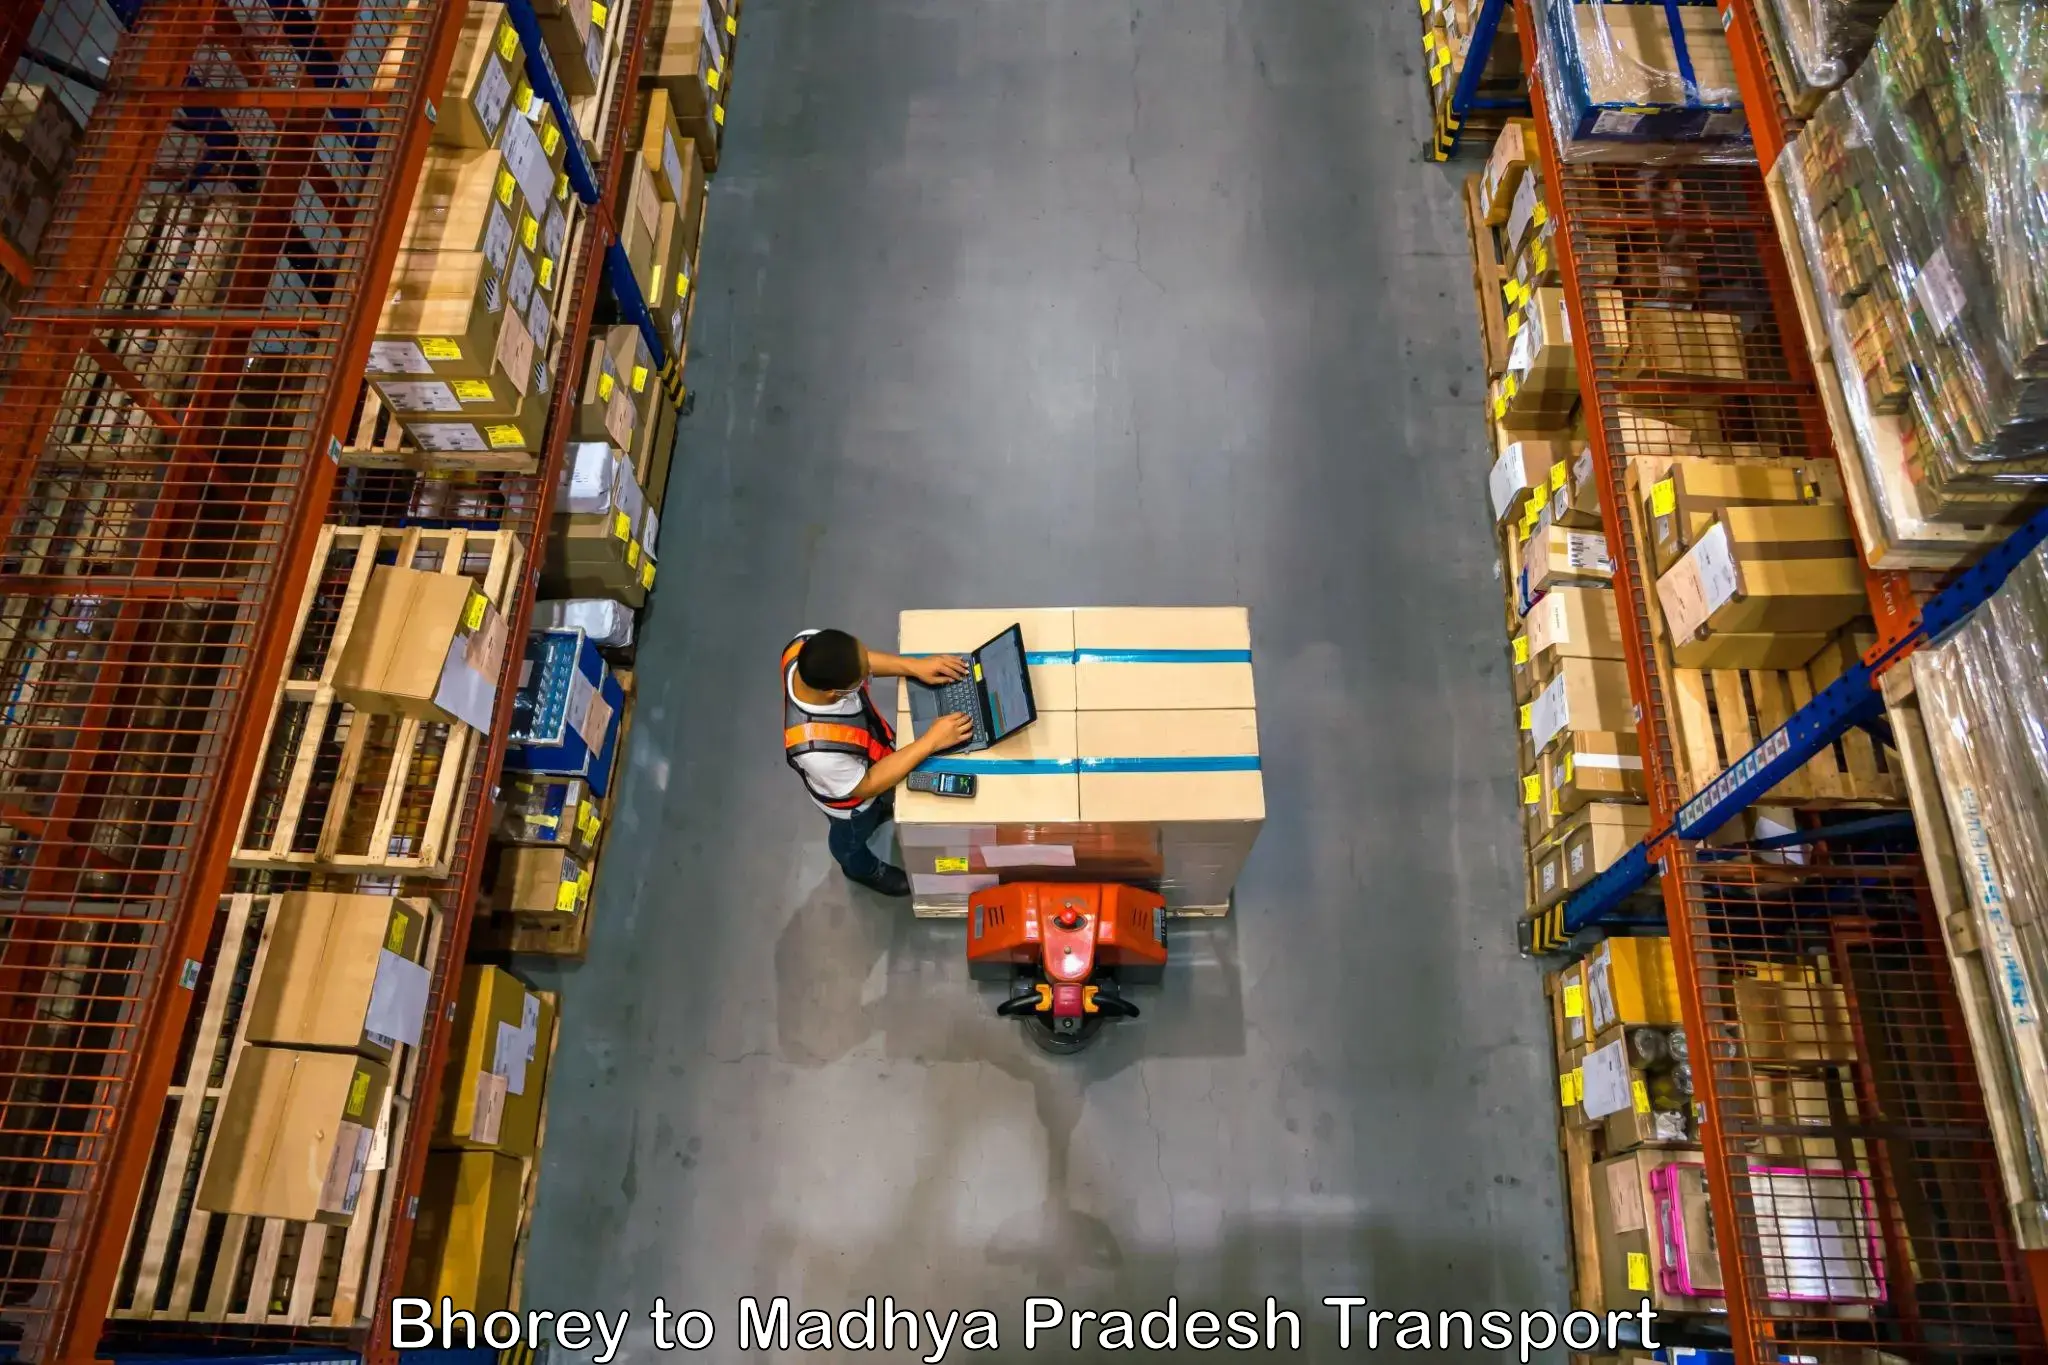 Cargo transport services in Bhorey to Gotegaon